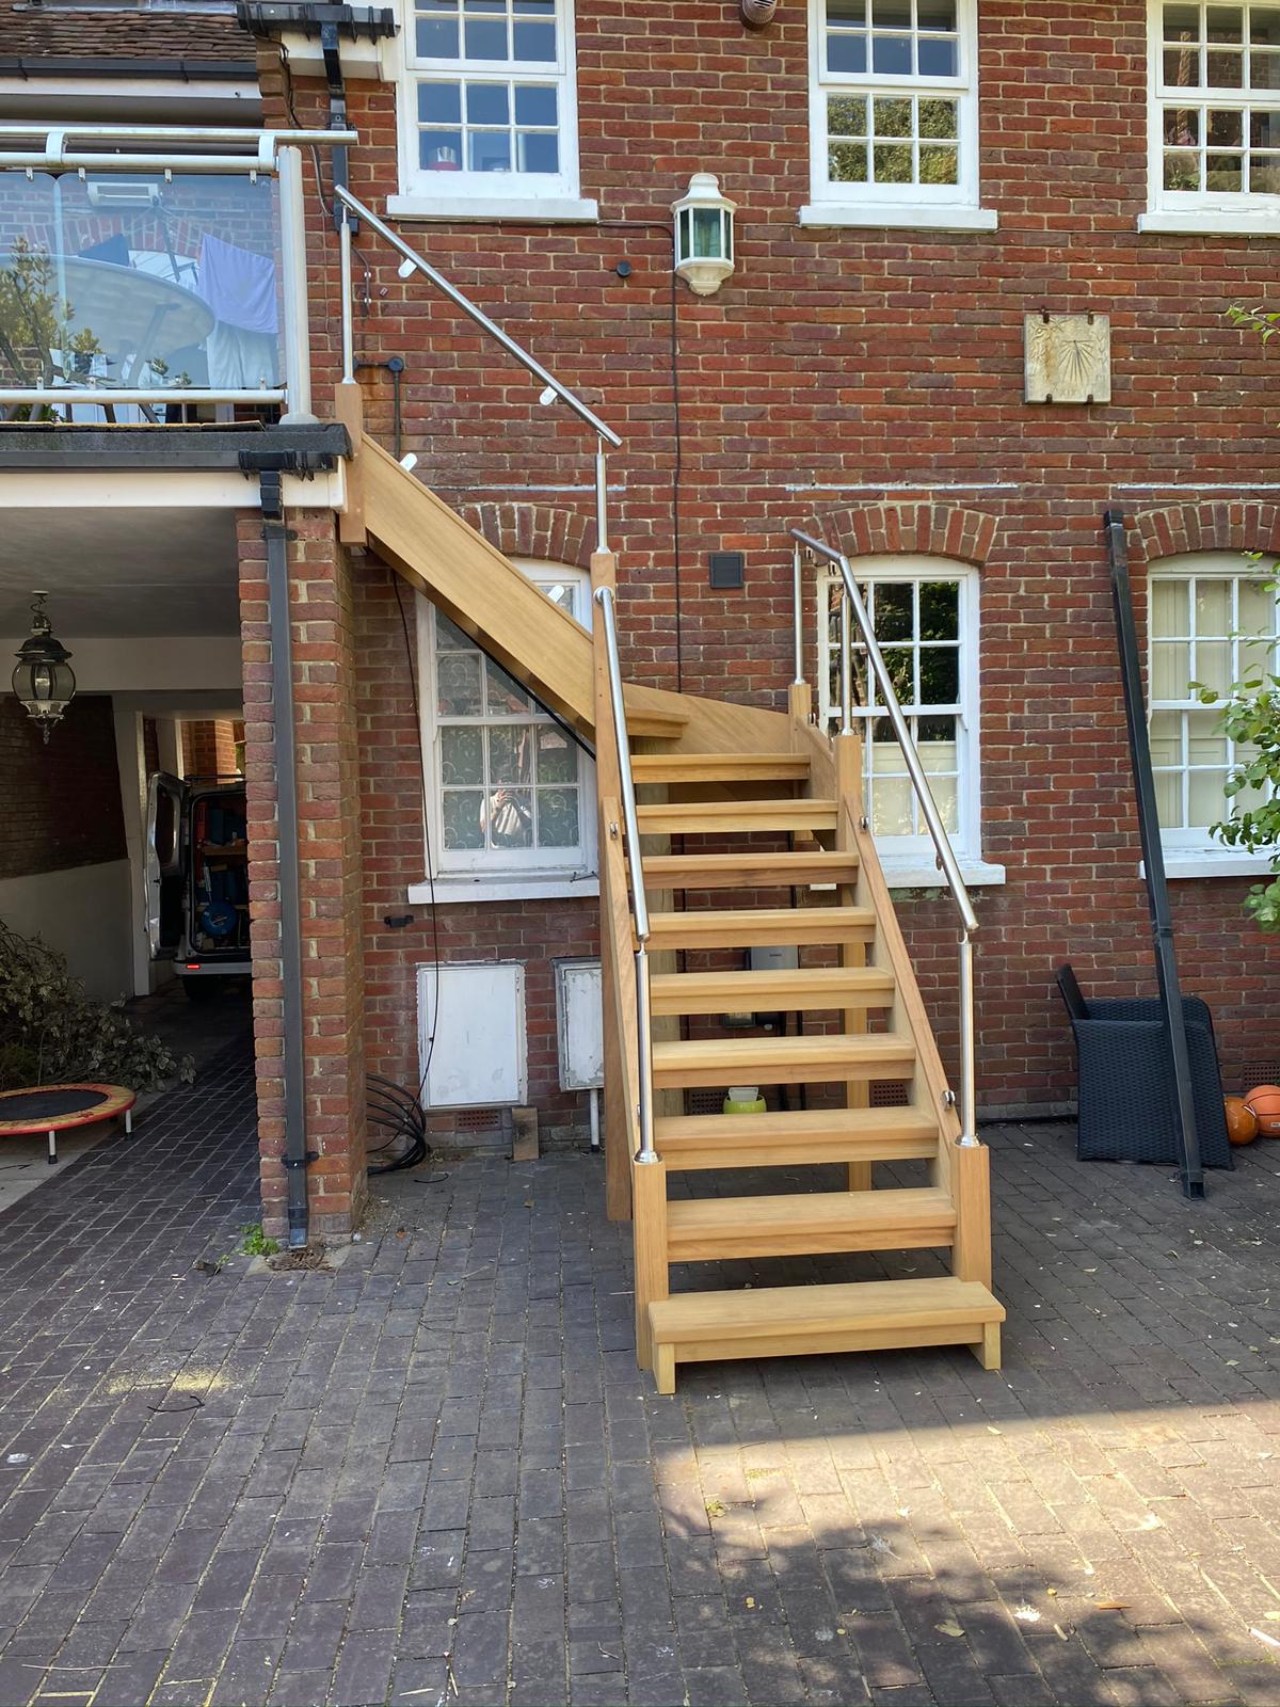 external wooden staircase with metal handles